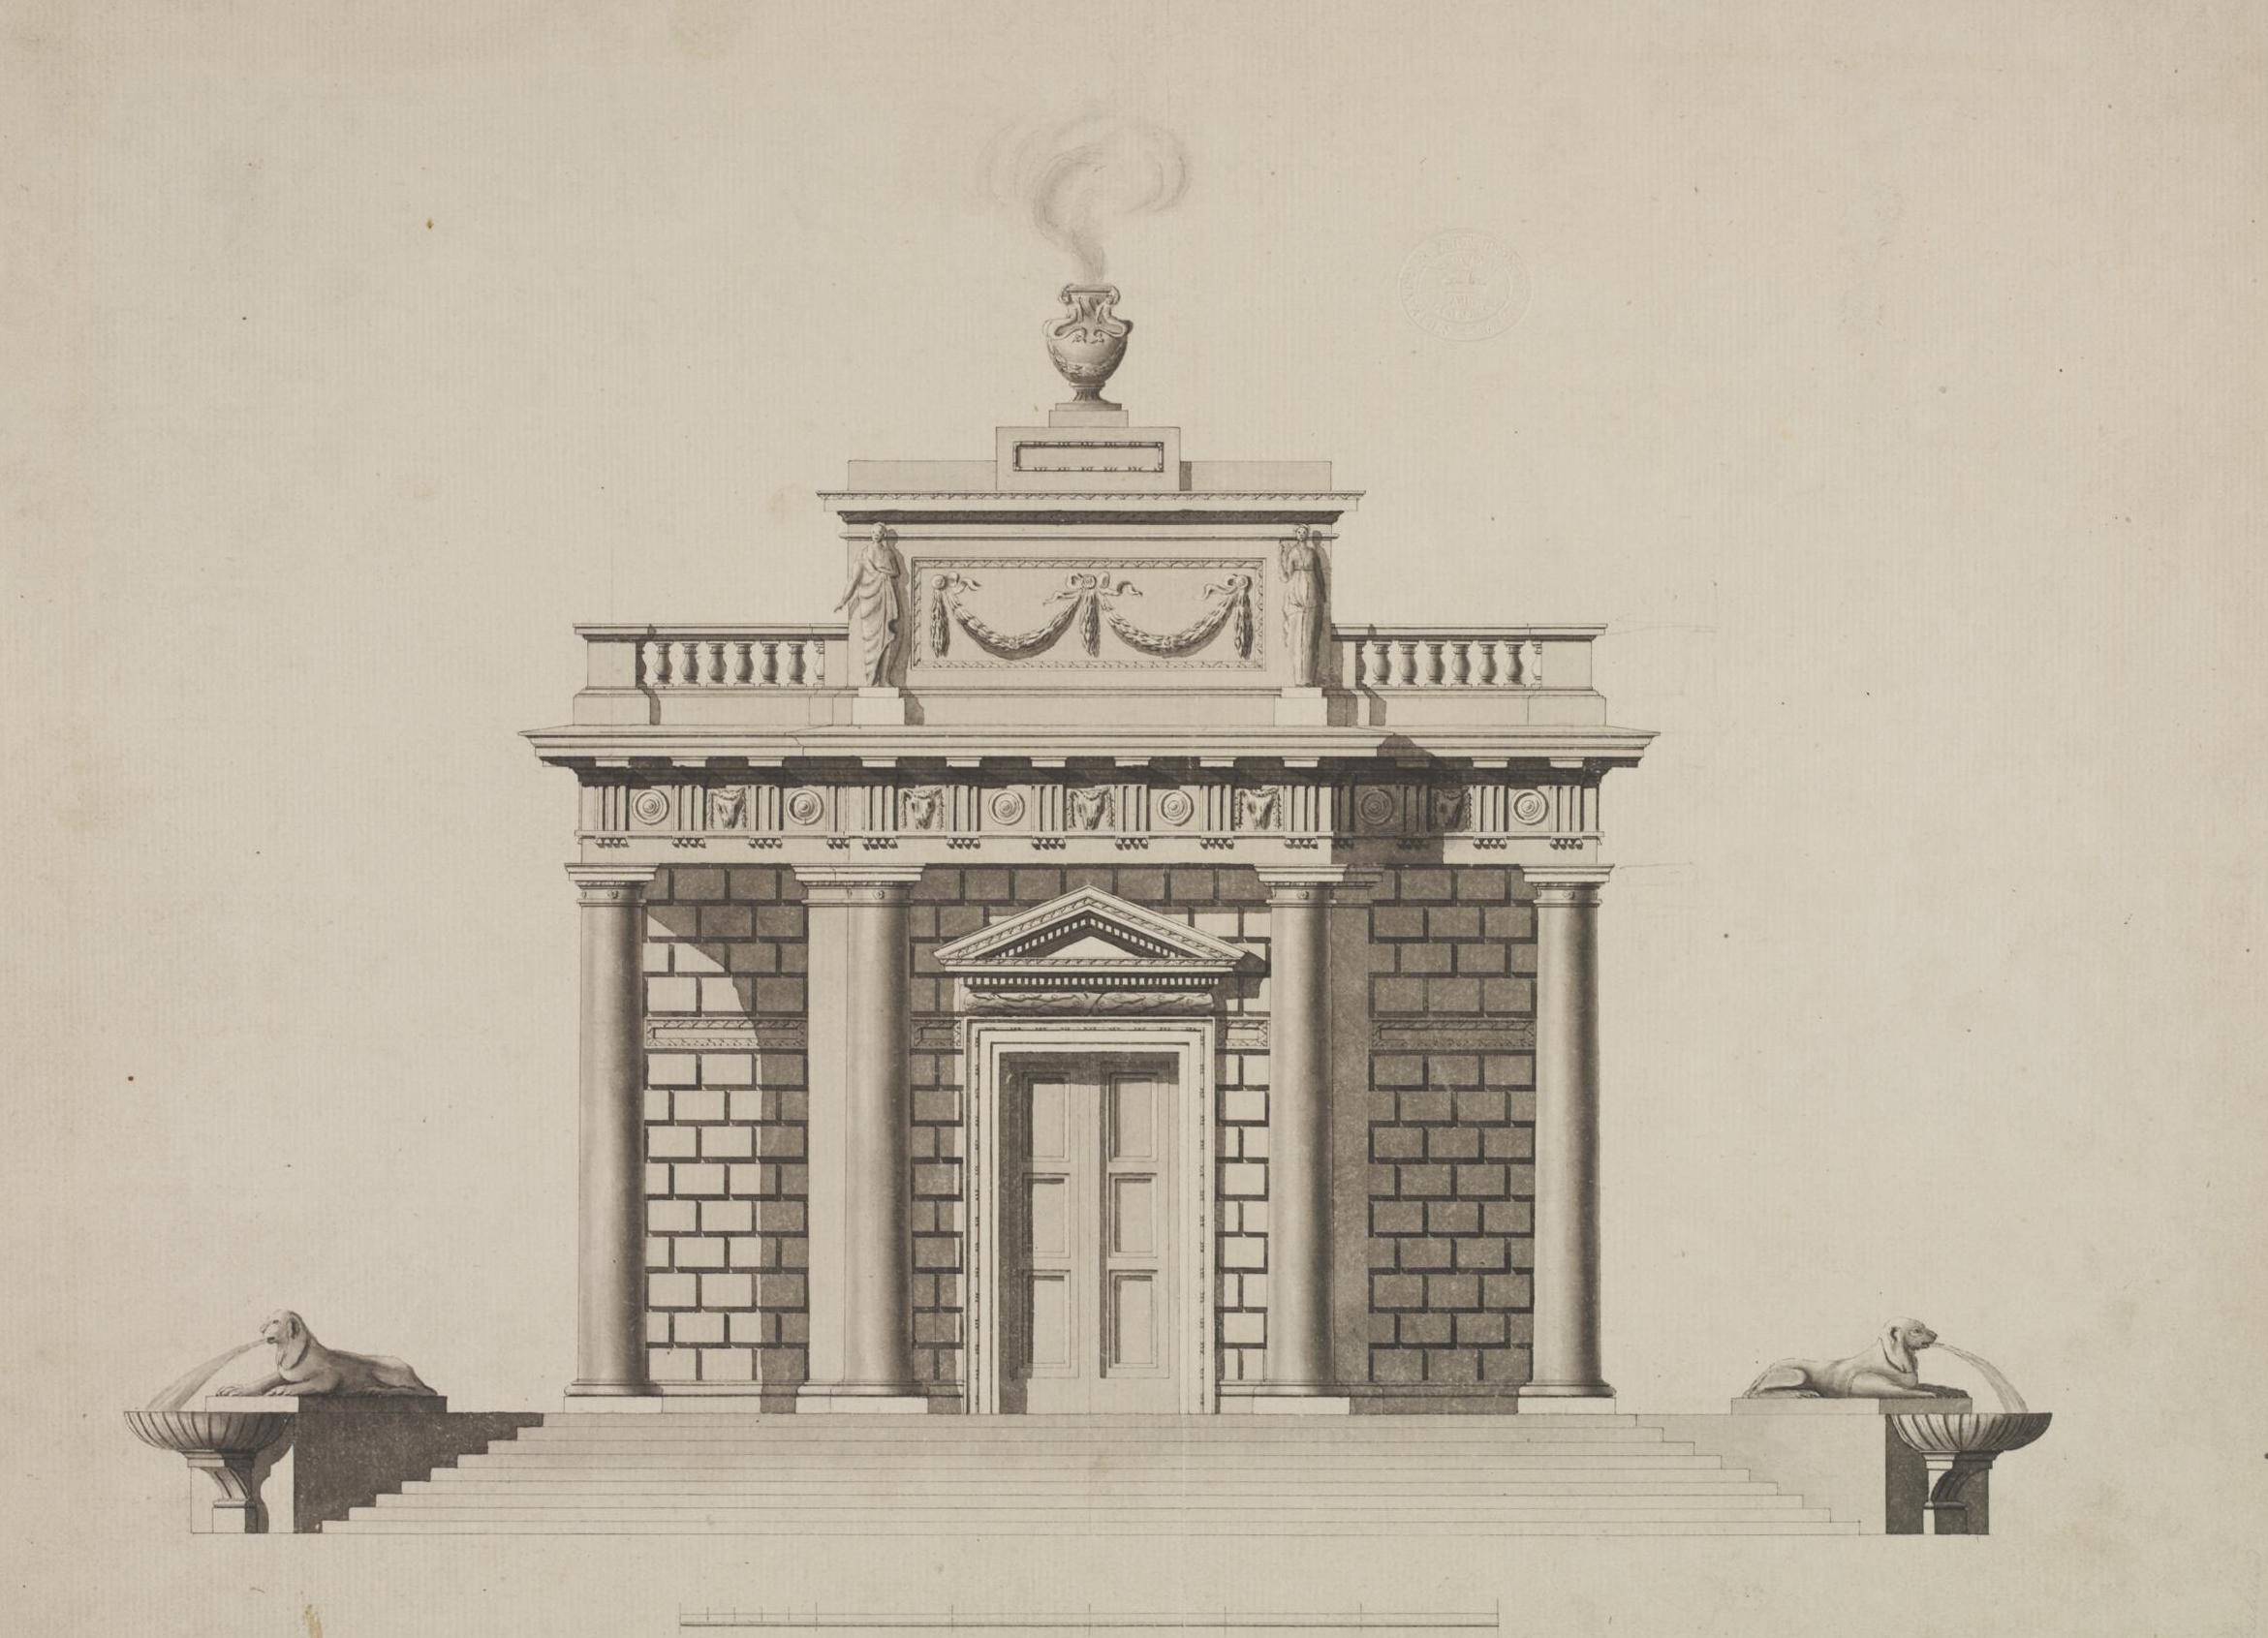 Elevation showing the entrance front of the Casino at Marino House, County Dublin for the 1st Earl of Charlemont, 18th century, Sir William Chambers (1723-1796). The Victoria and Albert Museum. This illustration is a version of the plate which appeared in Chambers' Treatise on Civil Architecture (1759). 